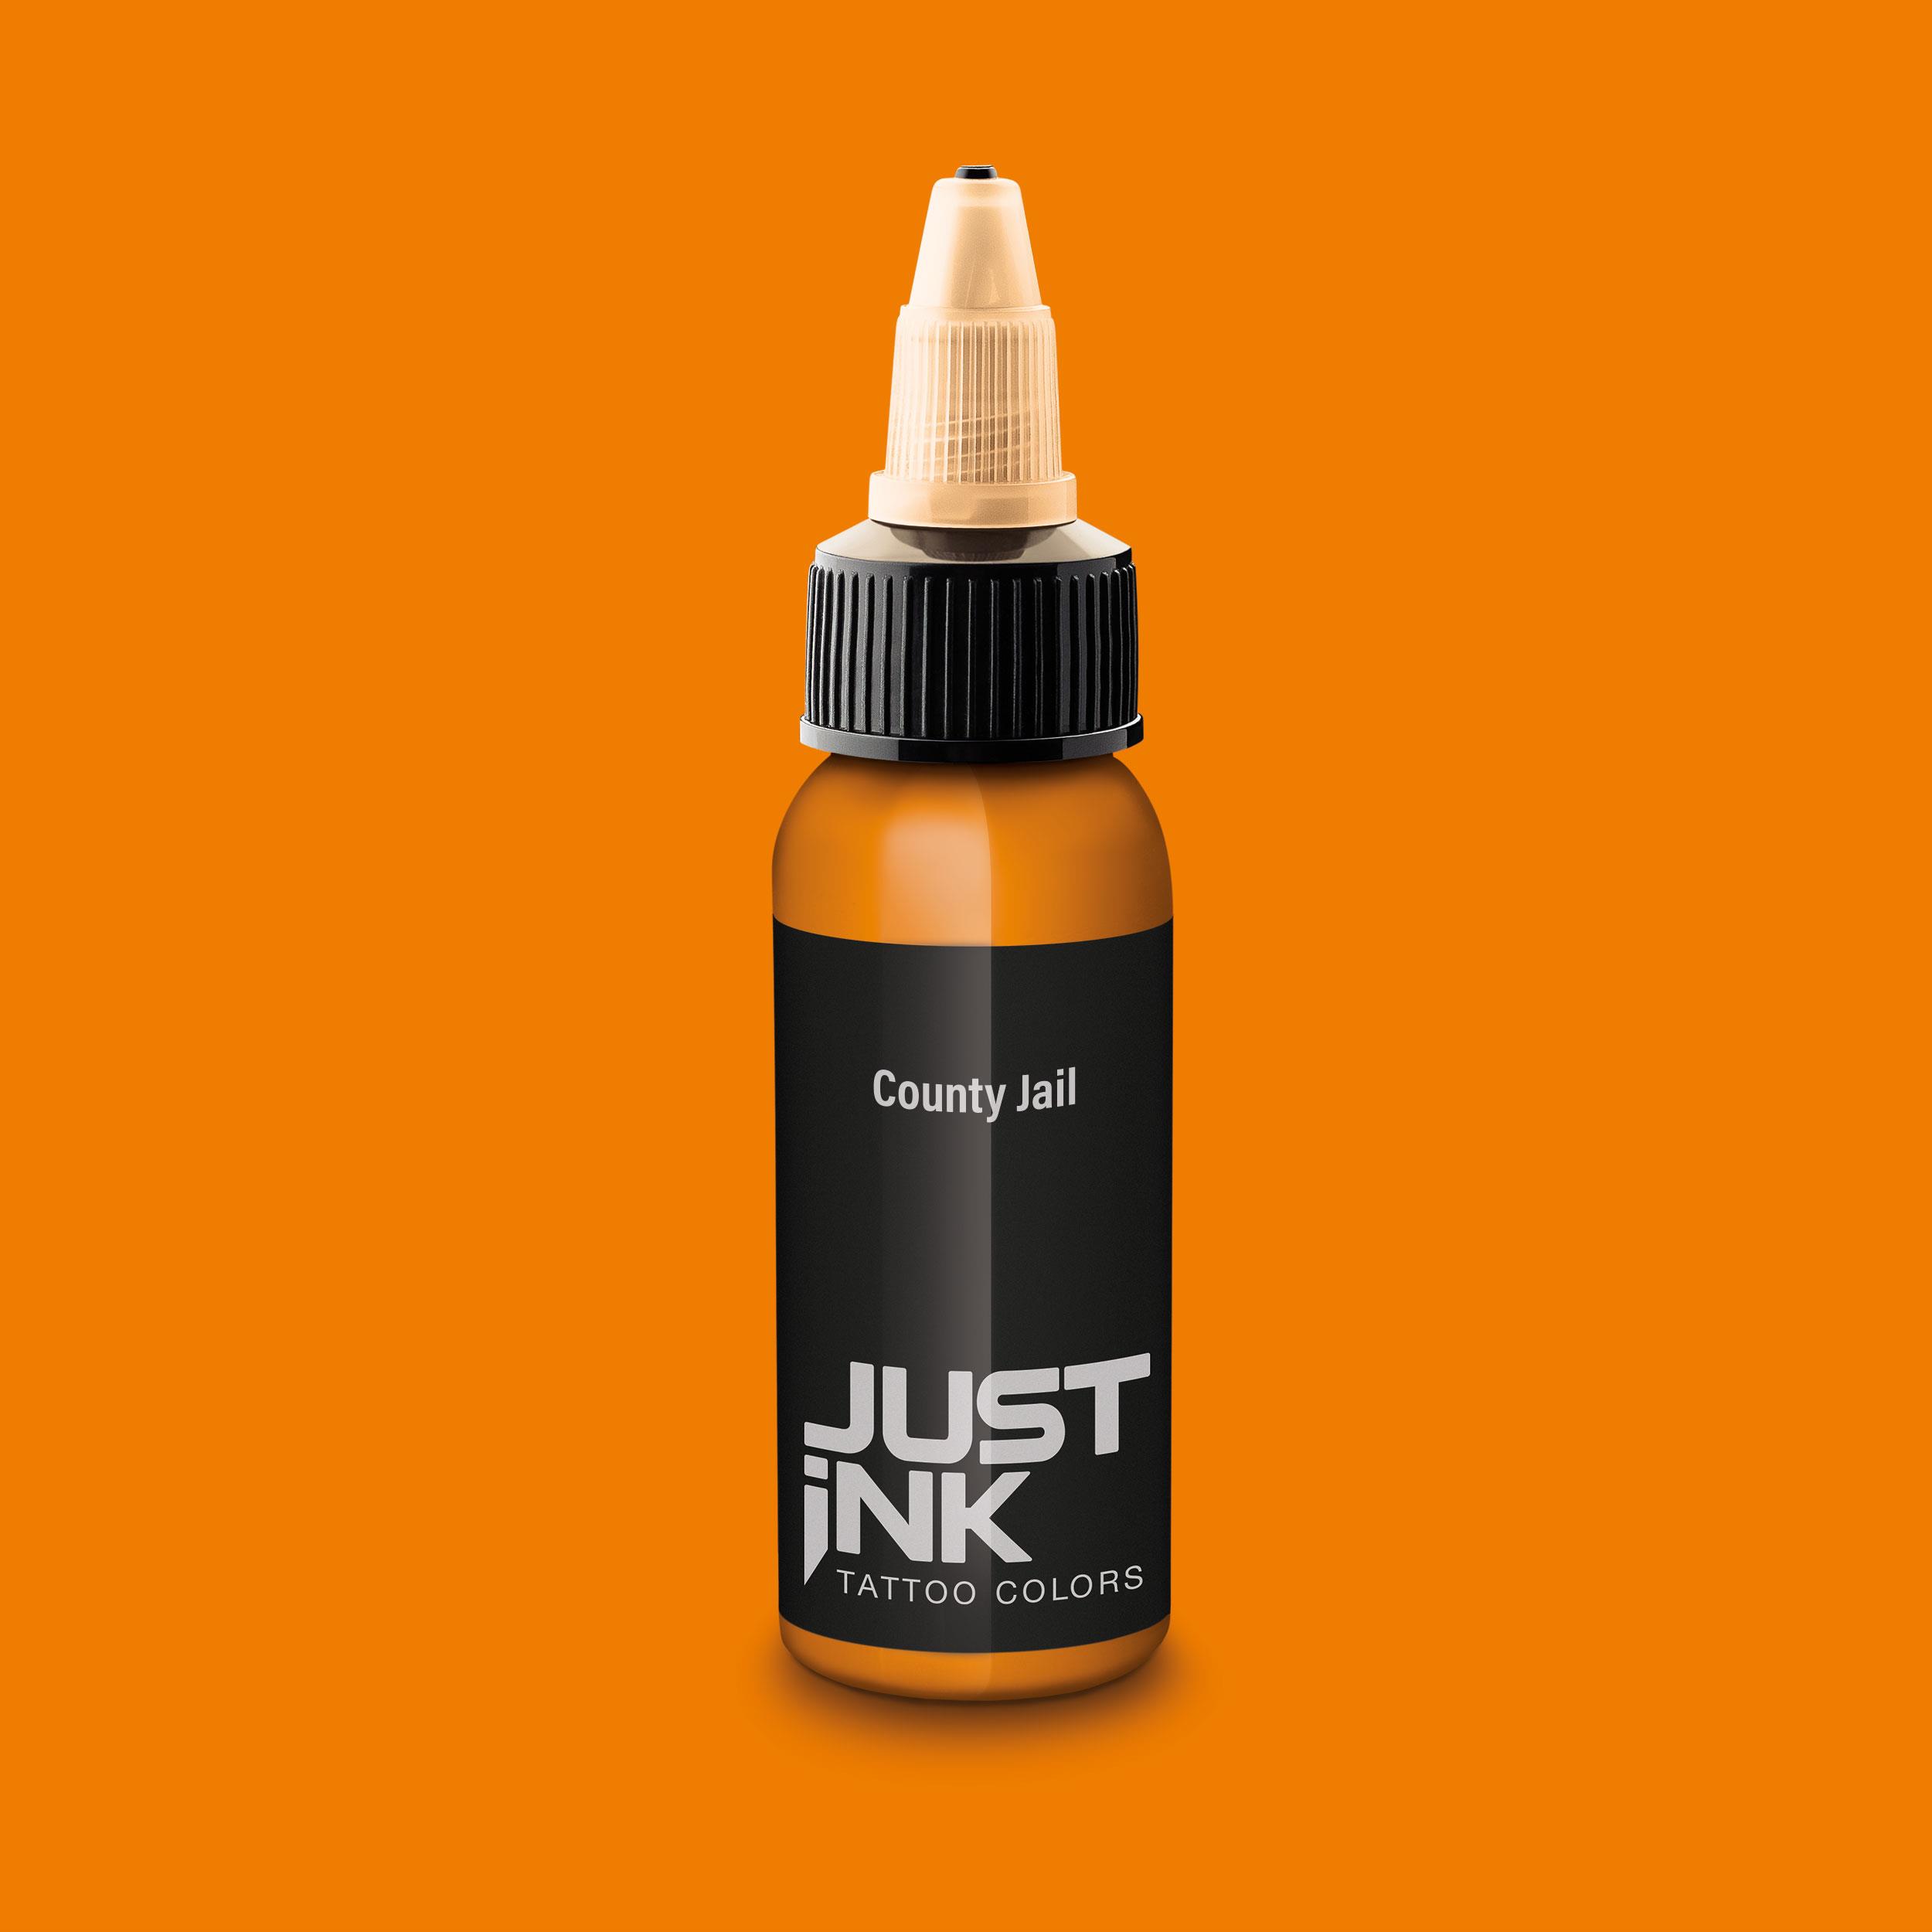 Just Ink - Tattoo Farbe - County Jail - 30 ml